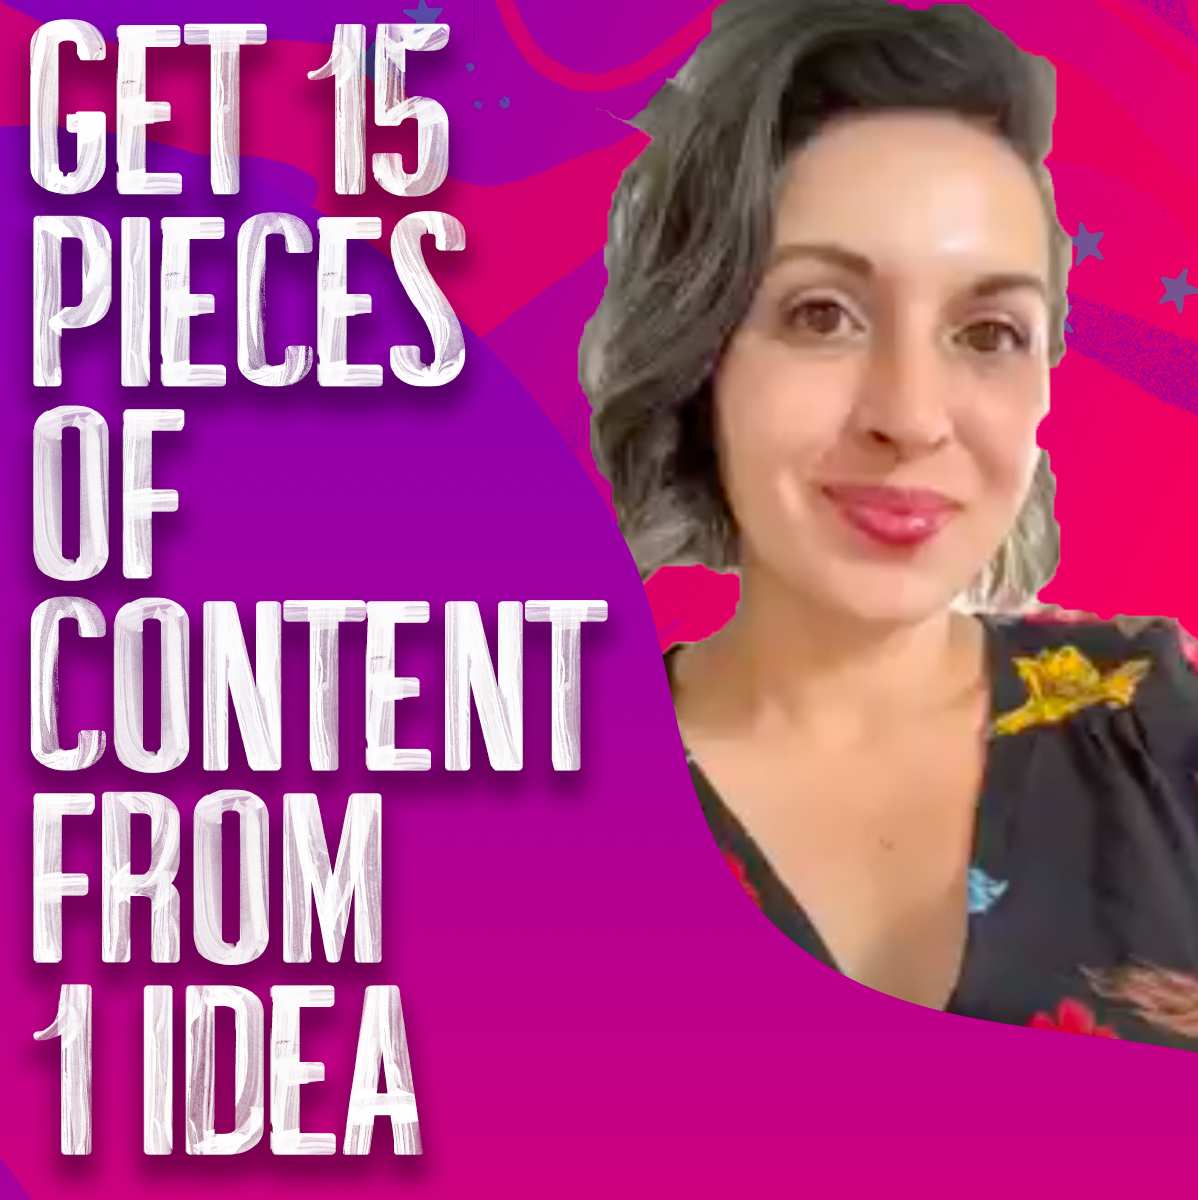 How to Get 15 Pieces of Social Media Content from 1 Topic